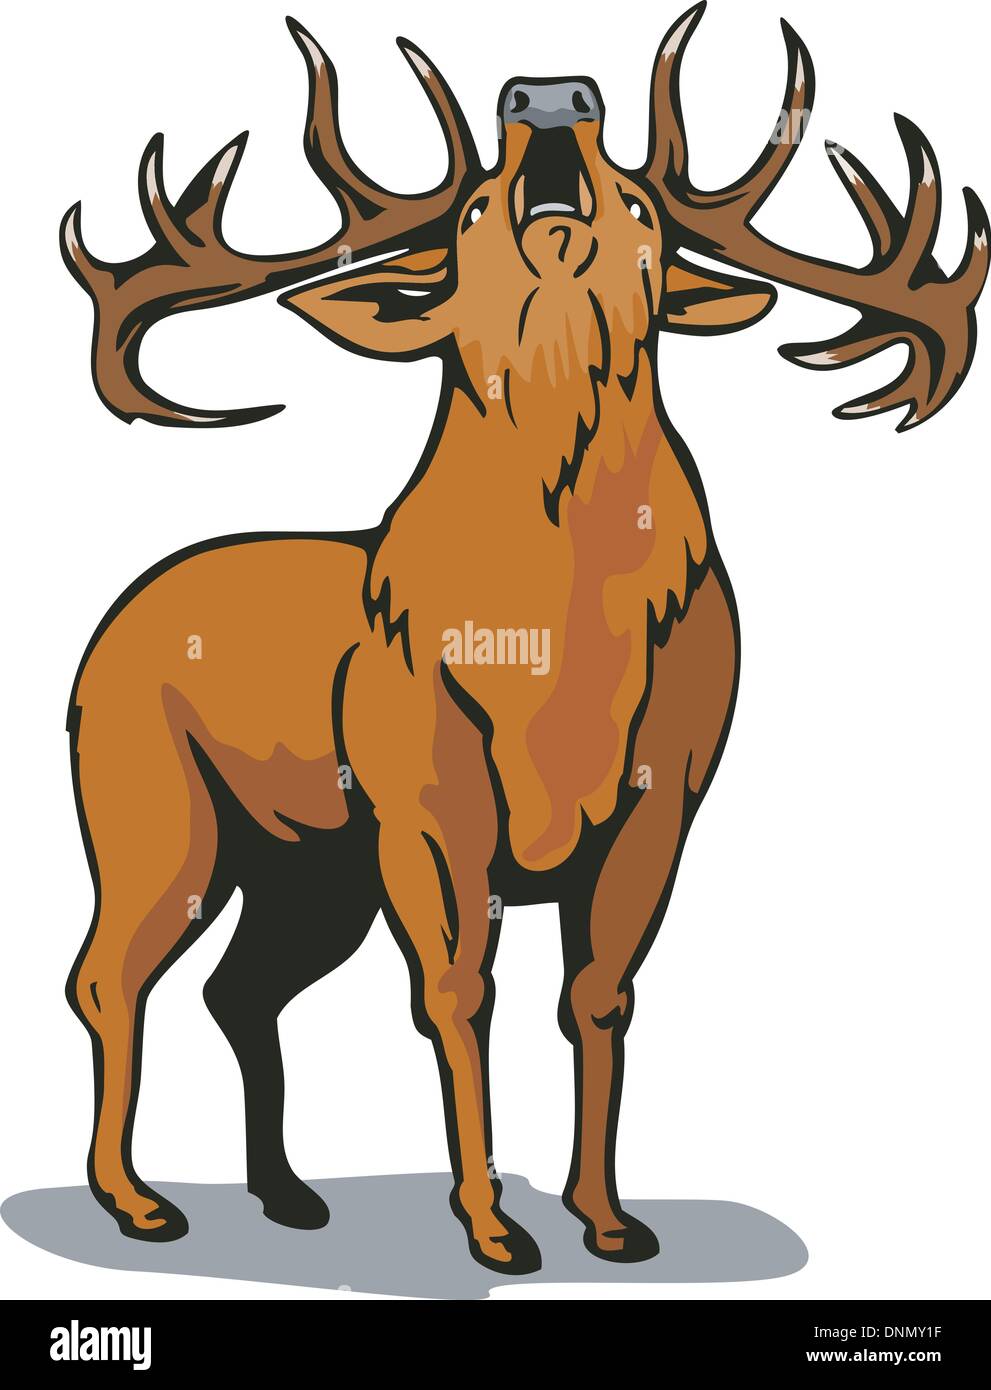 Illustration of a deer roaring isolated on white background done in retro style. Stock Vector